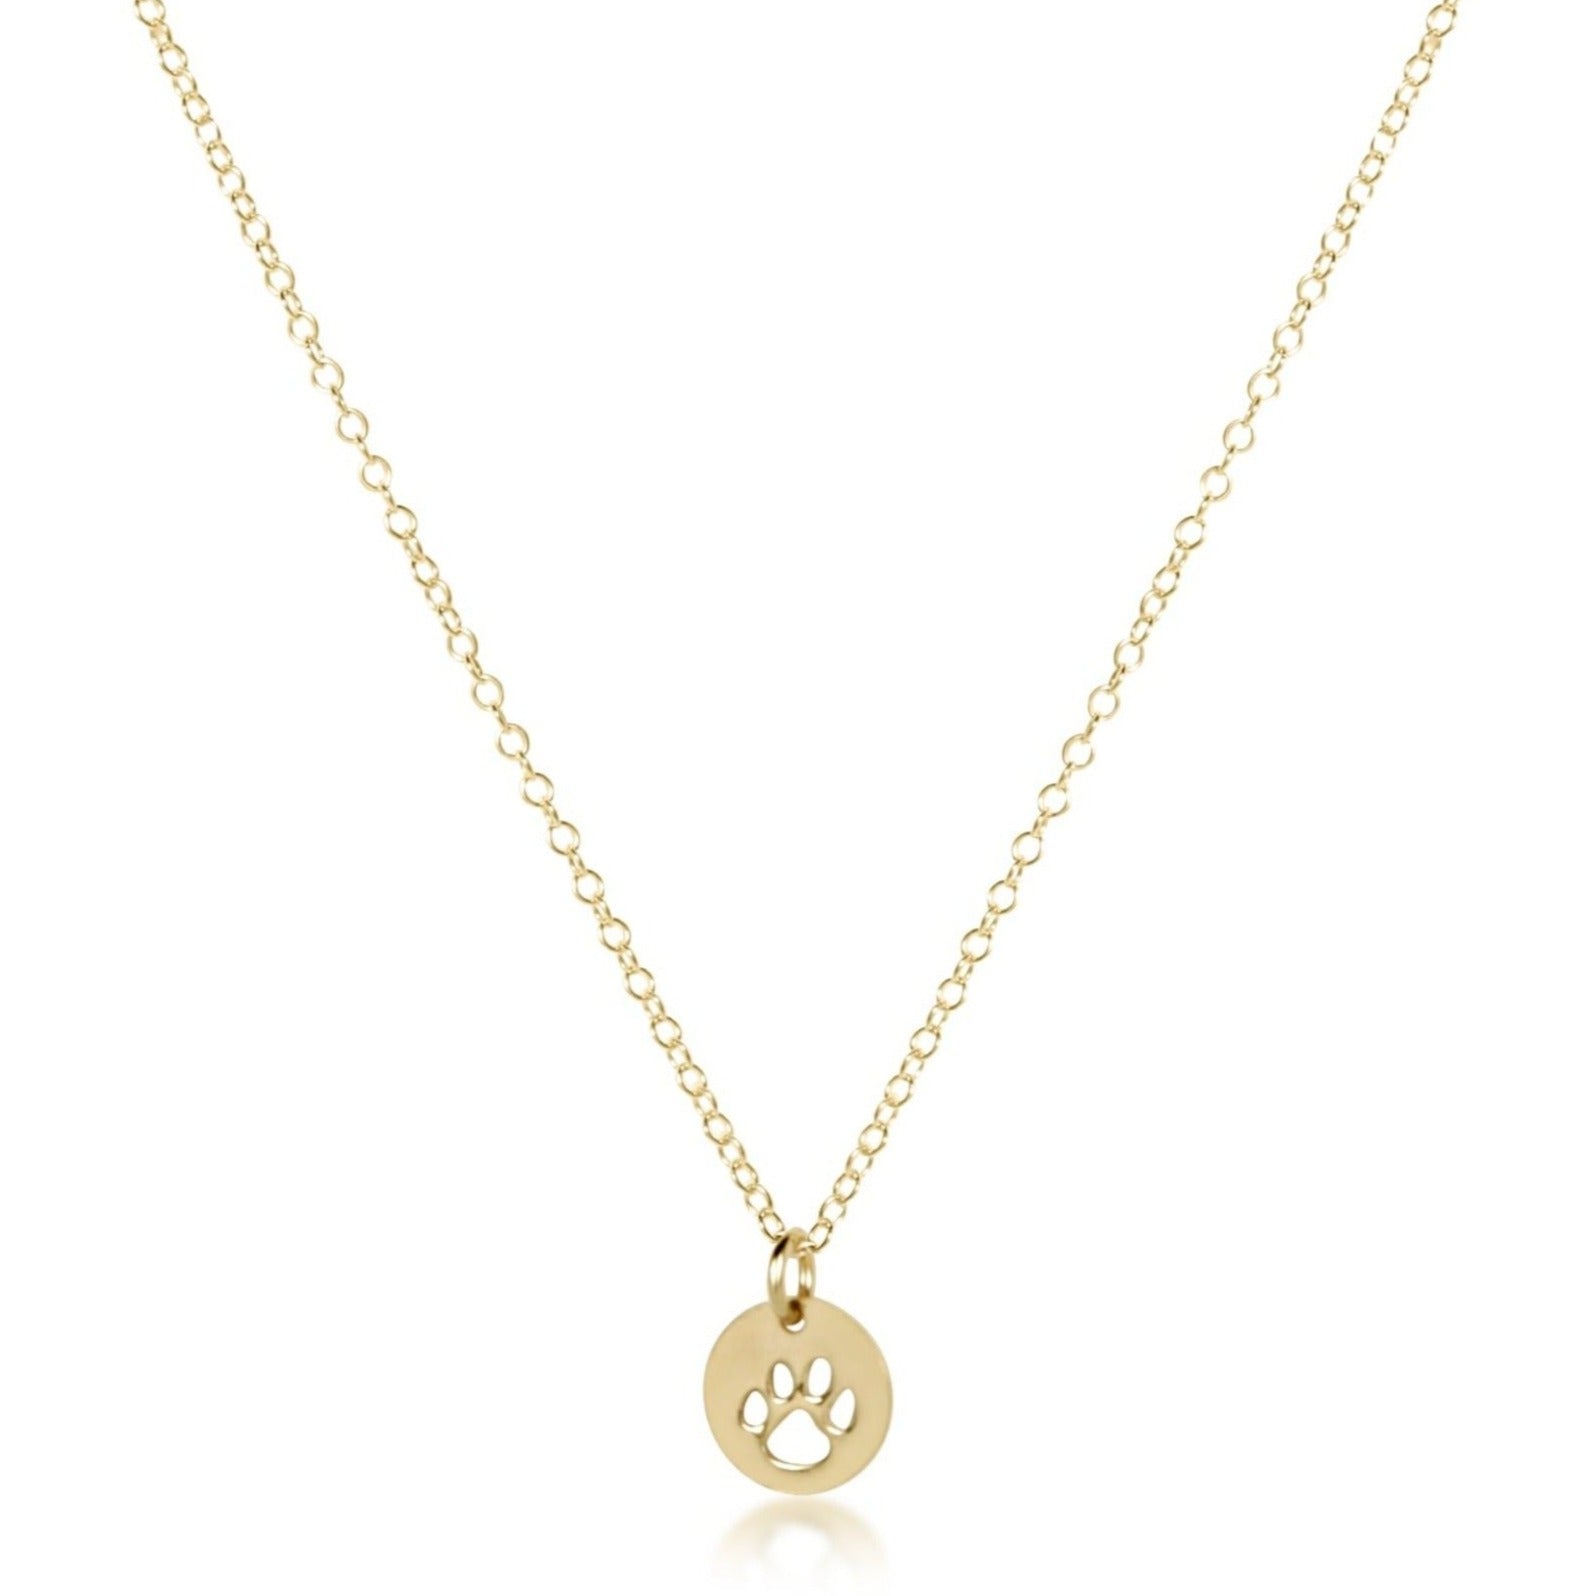 egirl 14" Necklace Gold- Paw Print Small Gold Disc